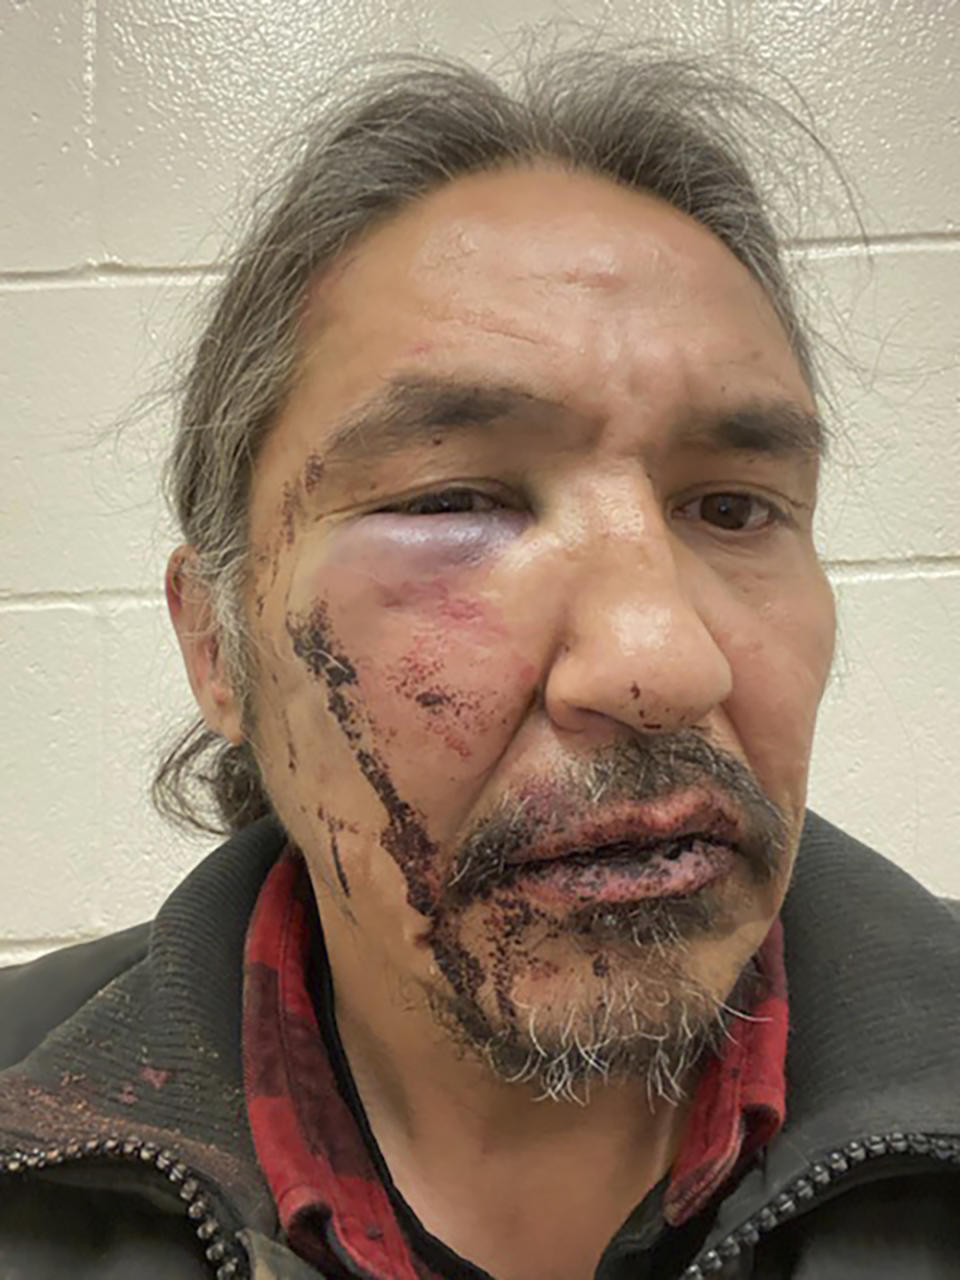 This March 10, 2020 photo provided by Chief Adam, shows the bloodied face of Athabasca Chipewyan First Nation Chief Allan Adam after a confrontation with Royal Canadian Mounted Police. Canadian Prime Minister Justin Trudeau says police dashcam video of the violent arrest of the Canadian aboriginal chief is shocking and not an isolated incident. The arrest has received attention in Canada as a backlash against racism grows in the wake of the death of George Floyd, a black man who died after a white Minneapolis police officer pressed a knee to his neck. (Allan Adam/The Canadian Press via AP)